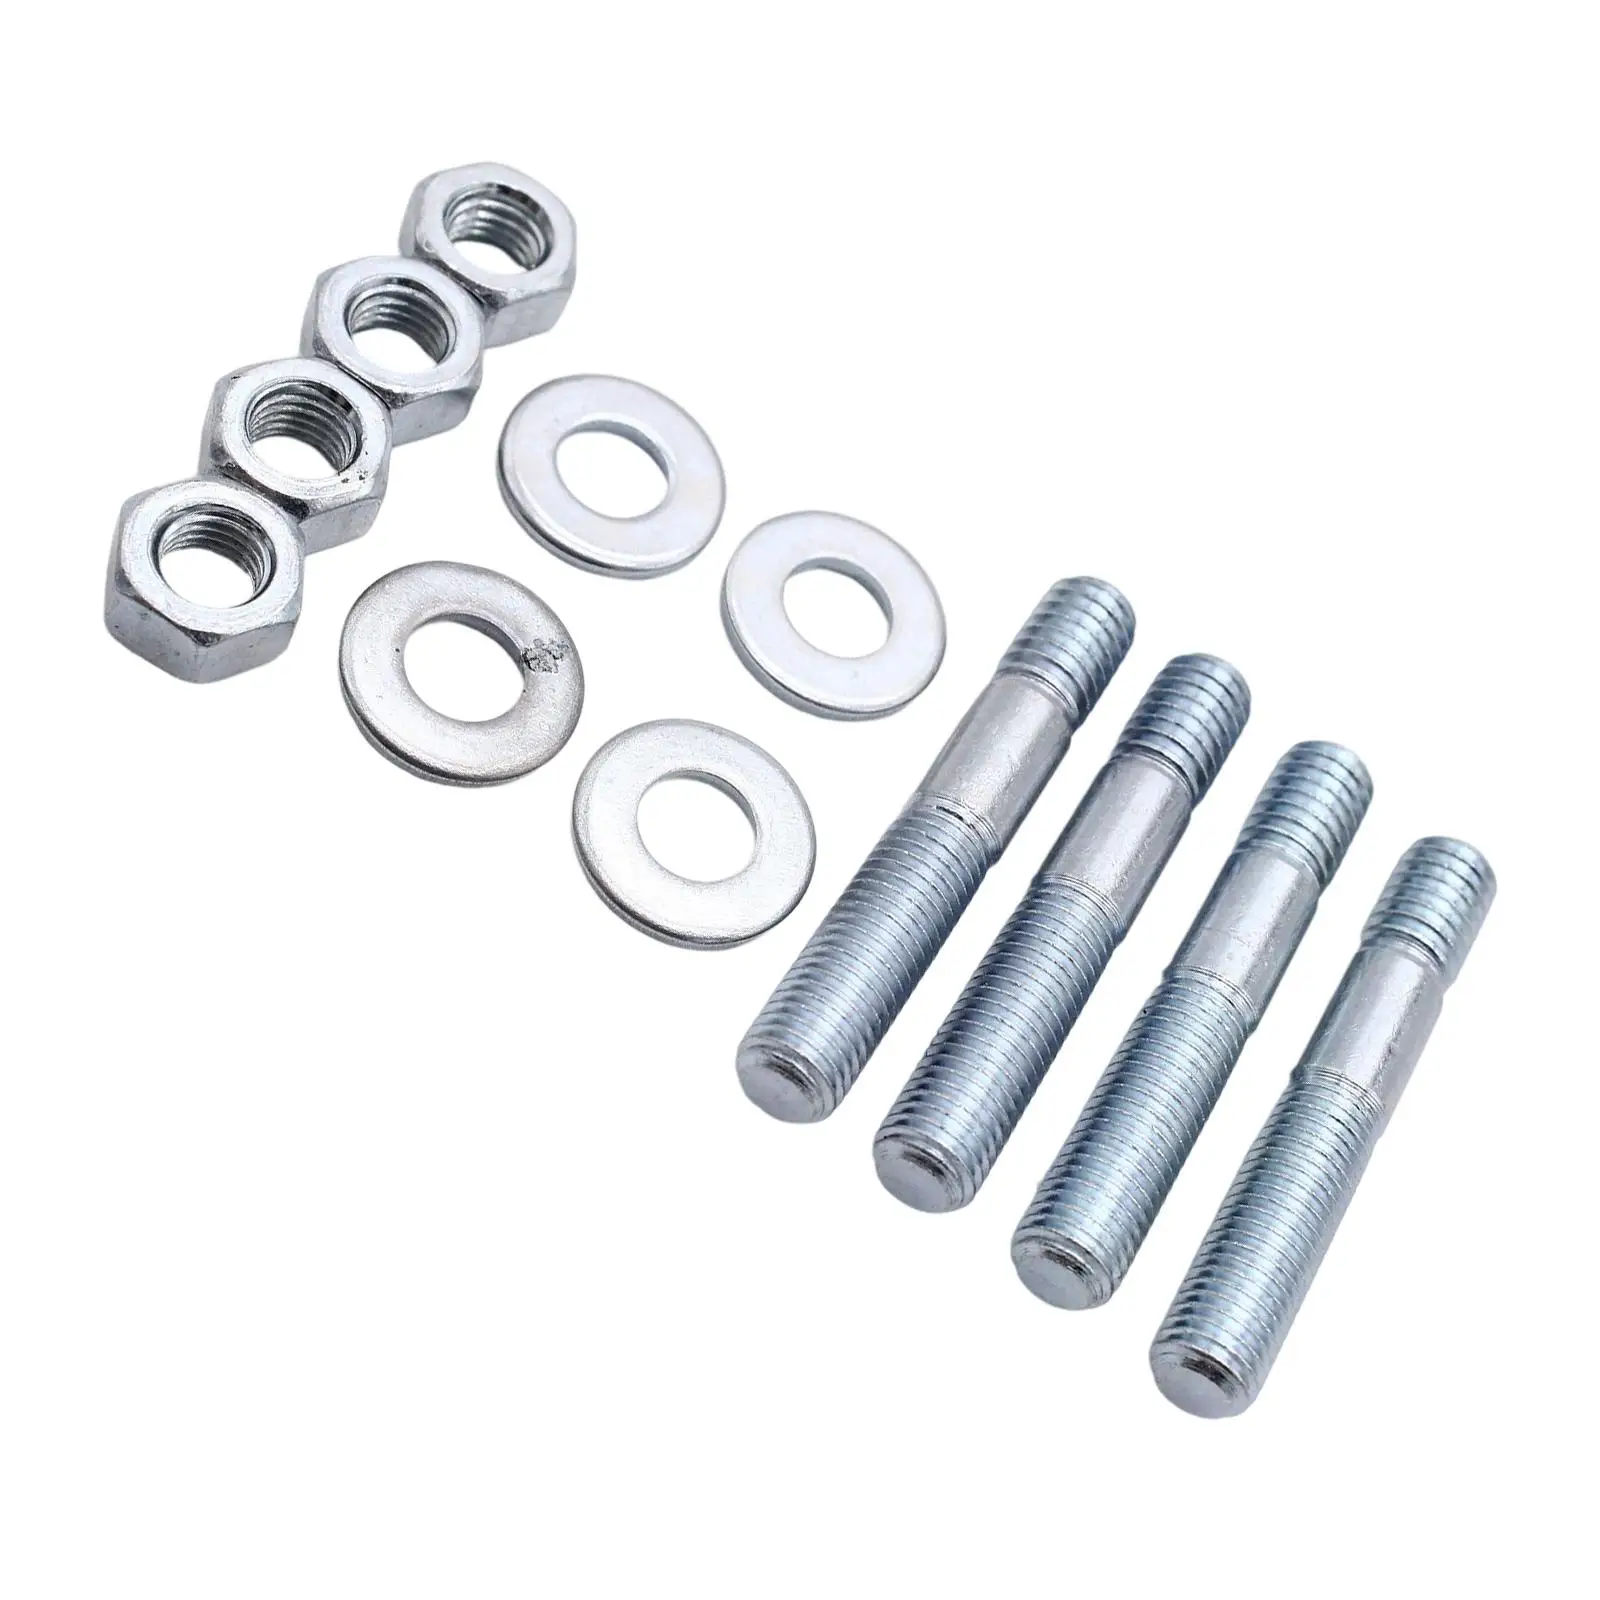 Car Carb Stud Accessories 4 Studs 4 Washer Fit for